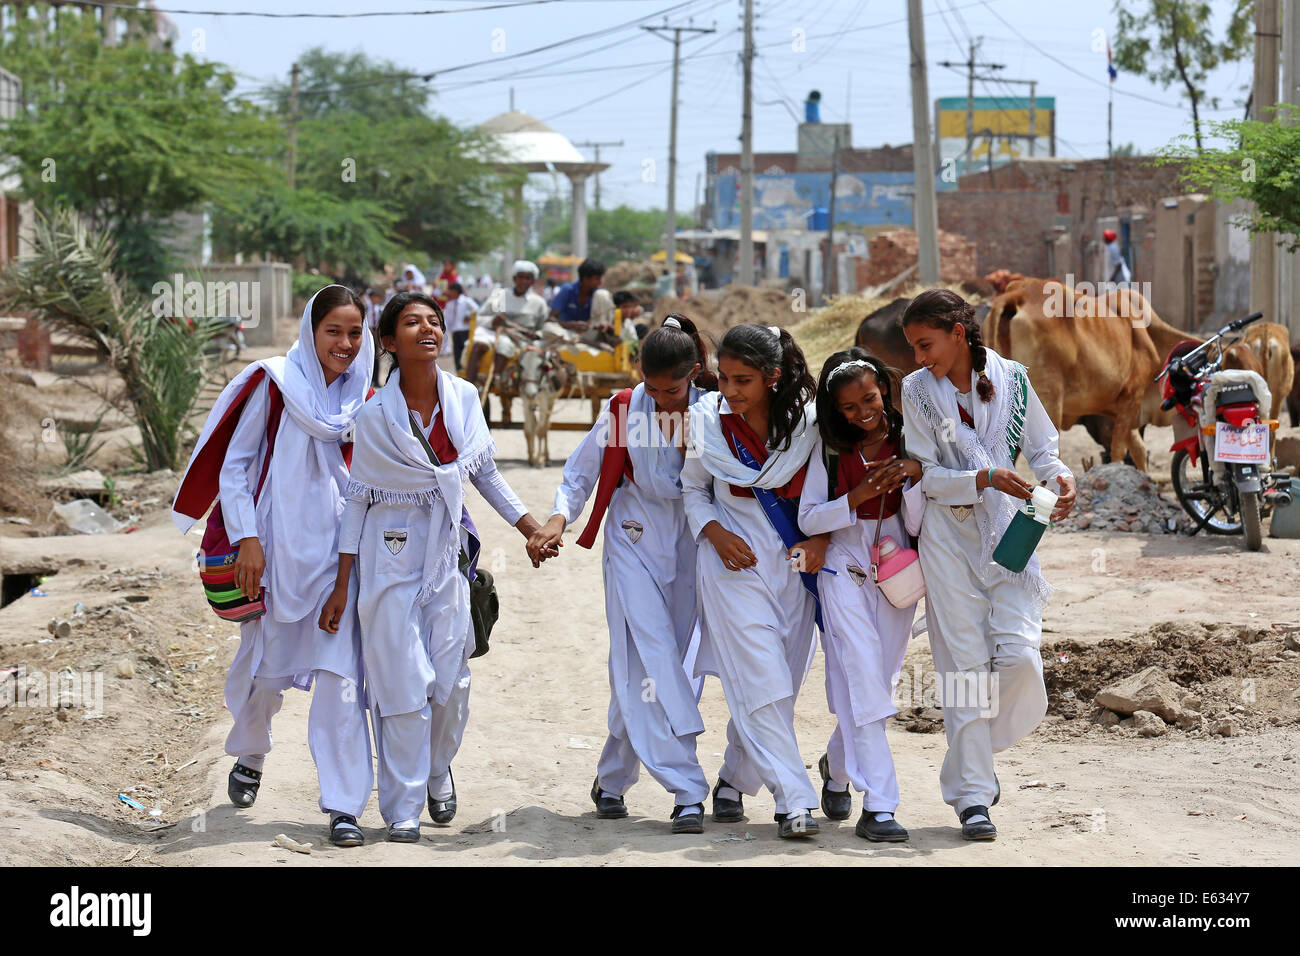 Young students pupils in school uniforms on their way home from school, christian village of Khushpur, Punjab Province, Pakistan Stock Photo